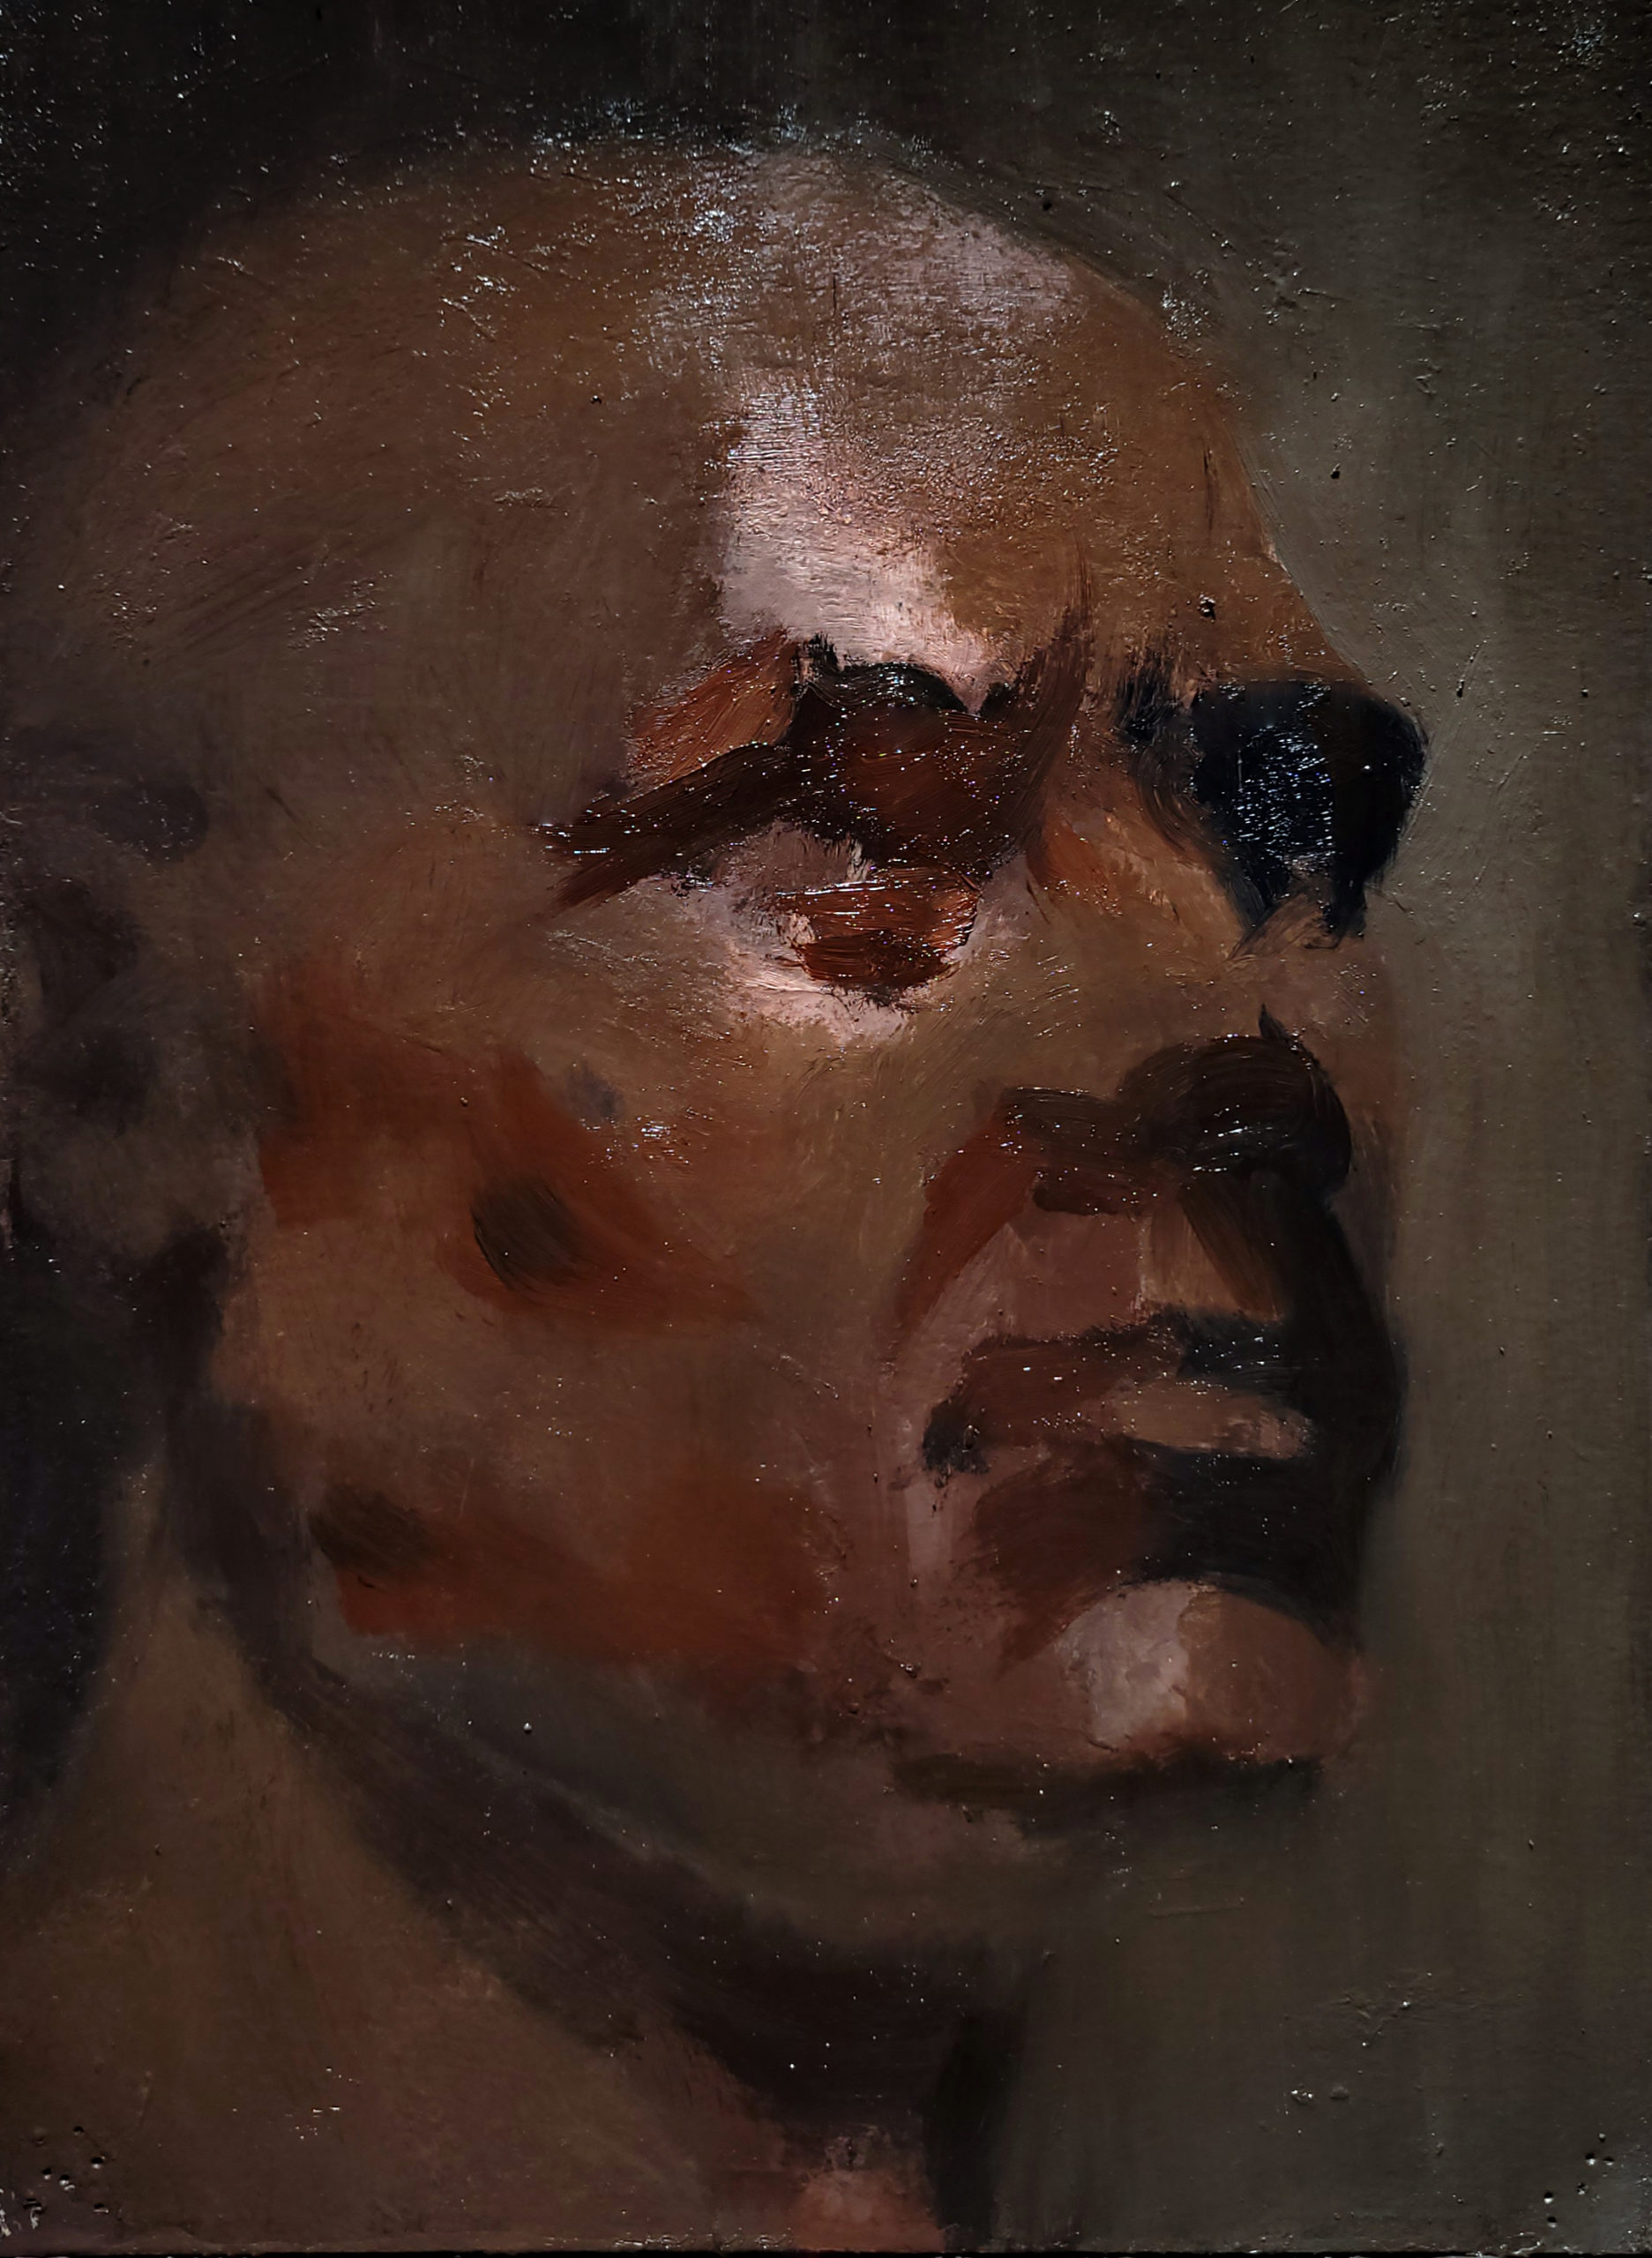 Oil painting onto paper of a head study.